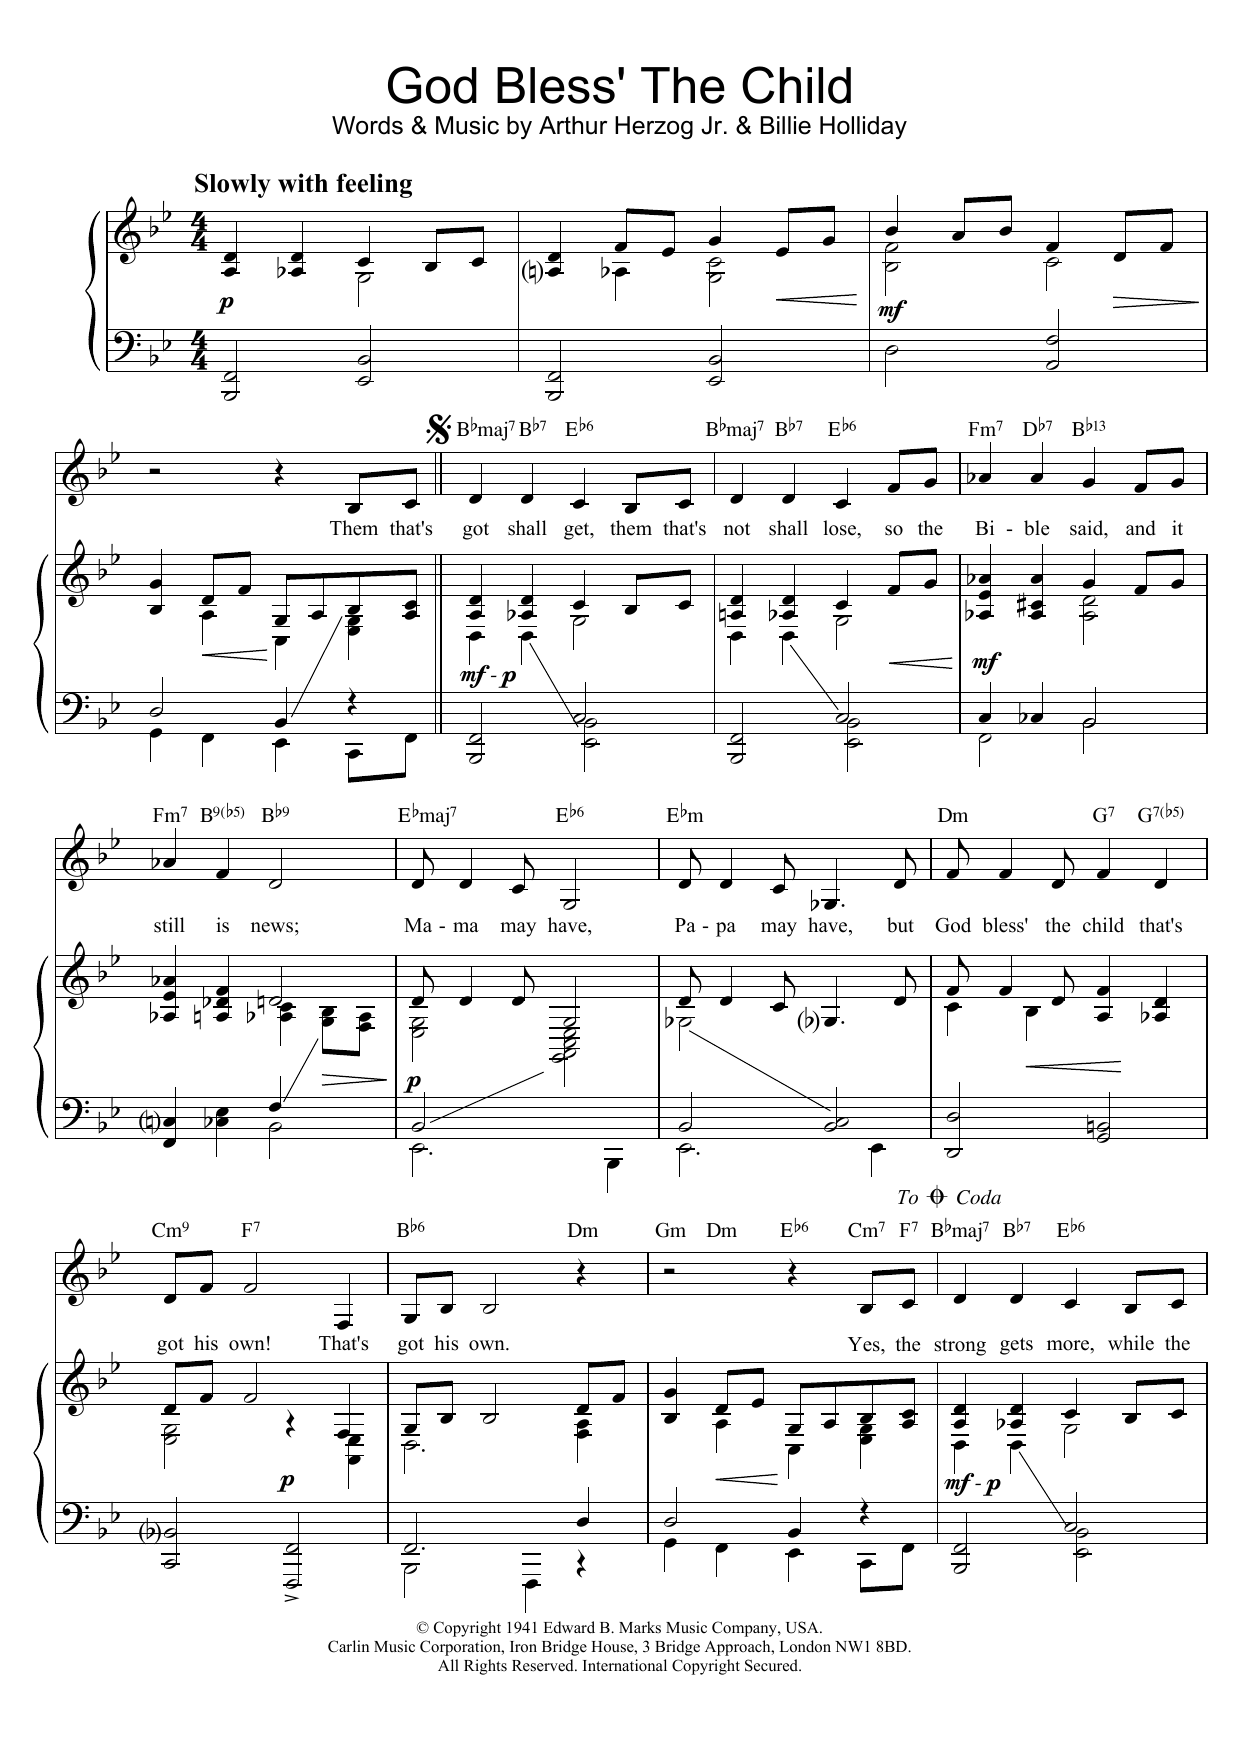 Download Billie Holiday God Bless' The Child Sheet Music